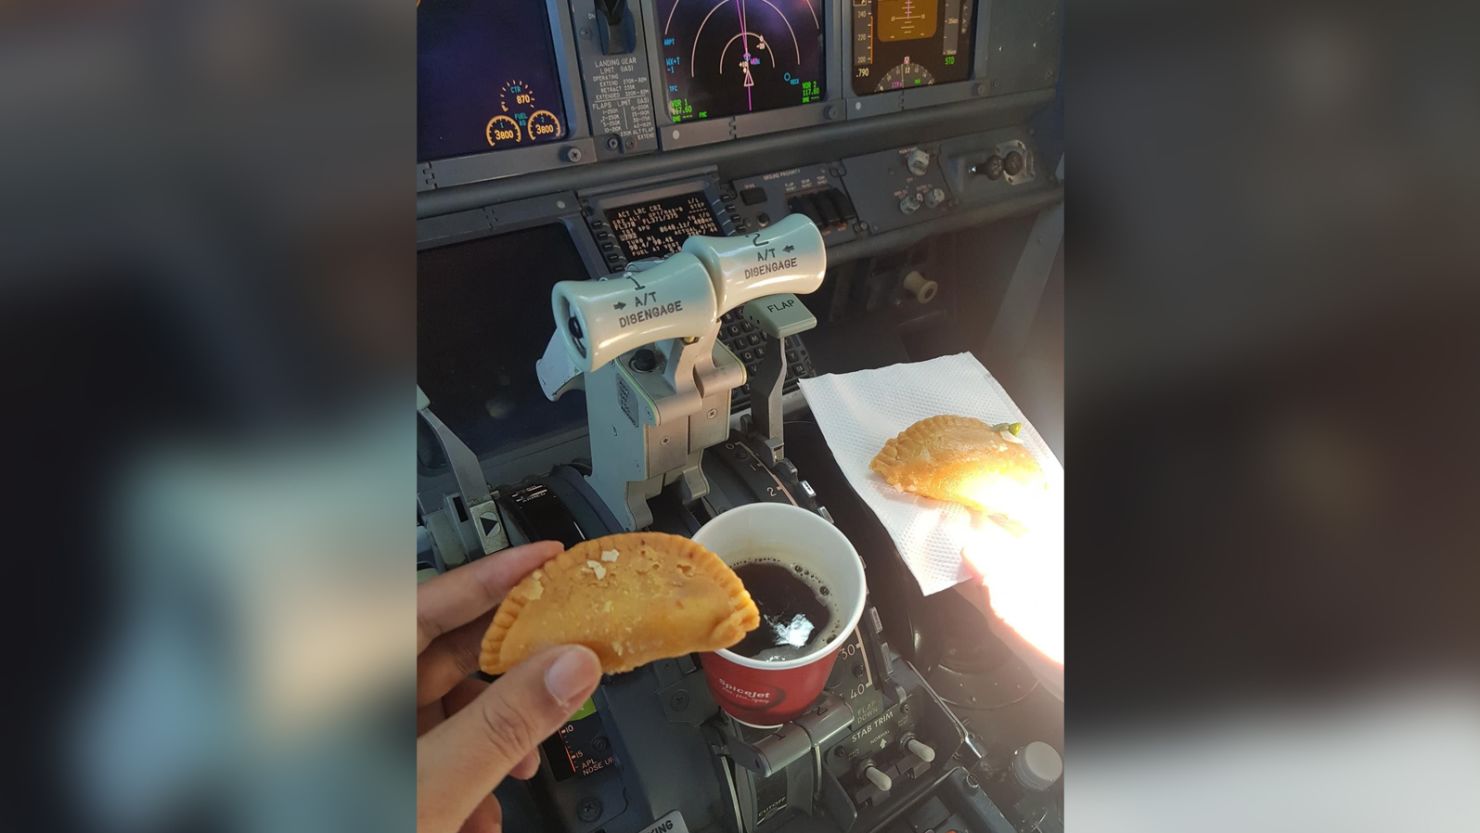 Photo shared on March 14, 2023 shows two pilots having a hot drink and traditional Indian pastry inside plane's cockpit.